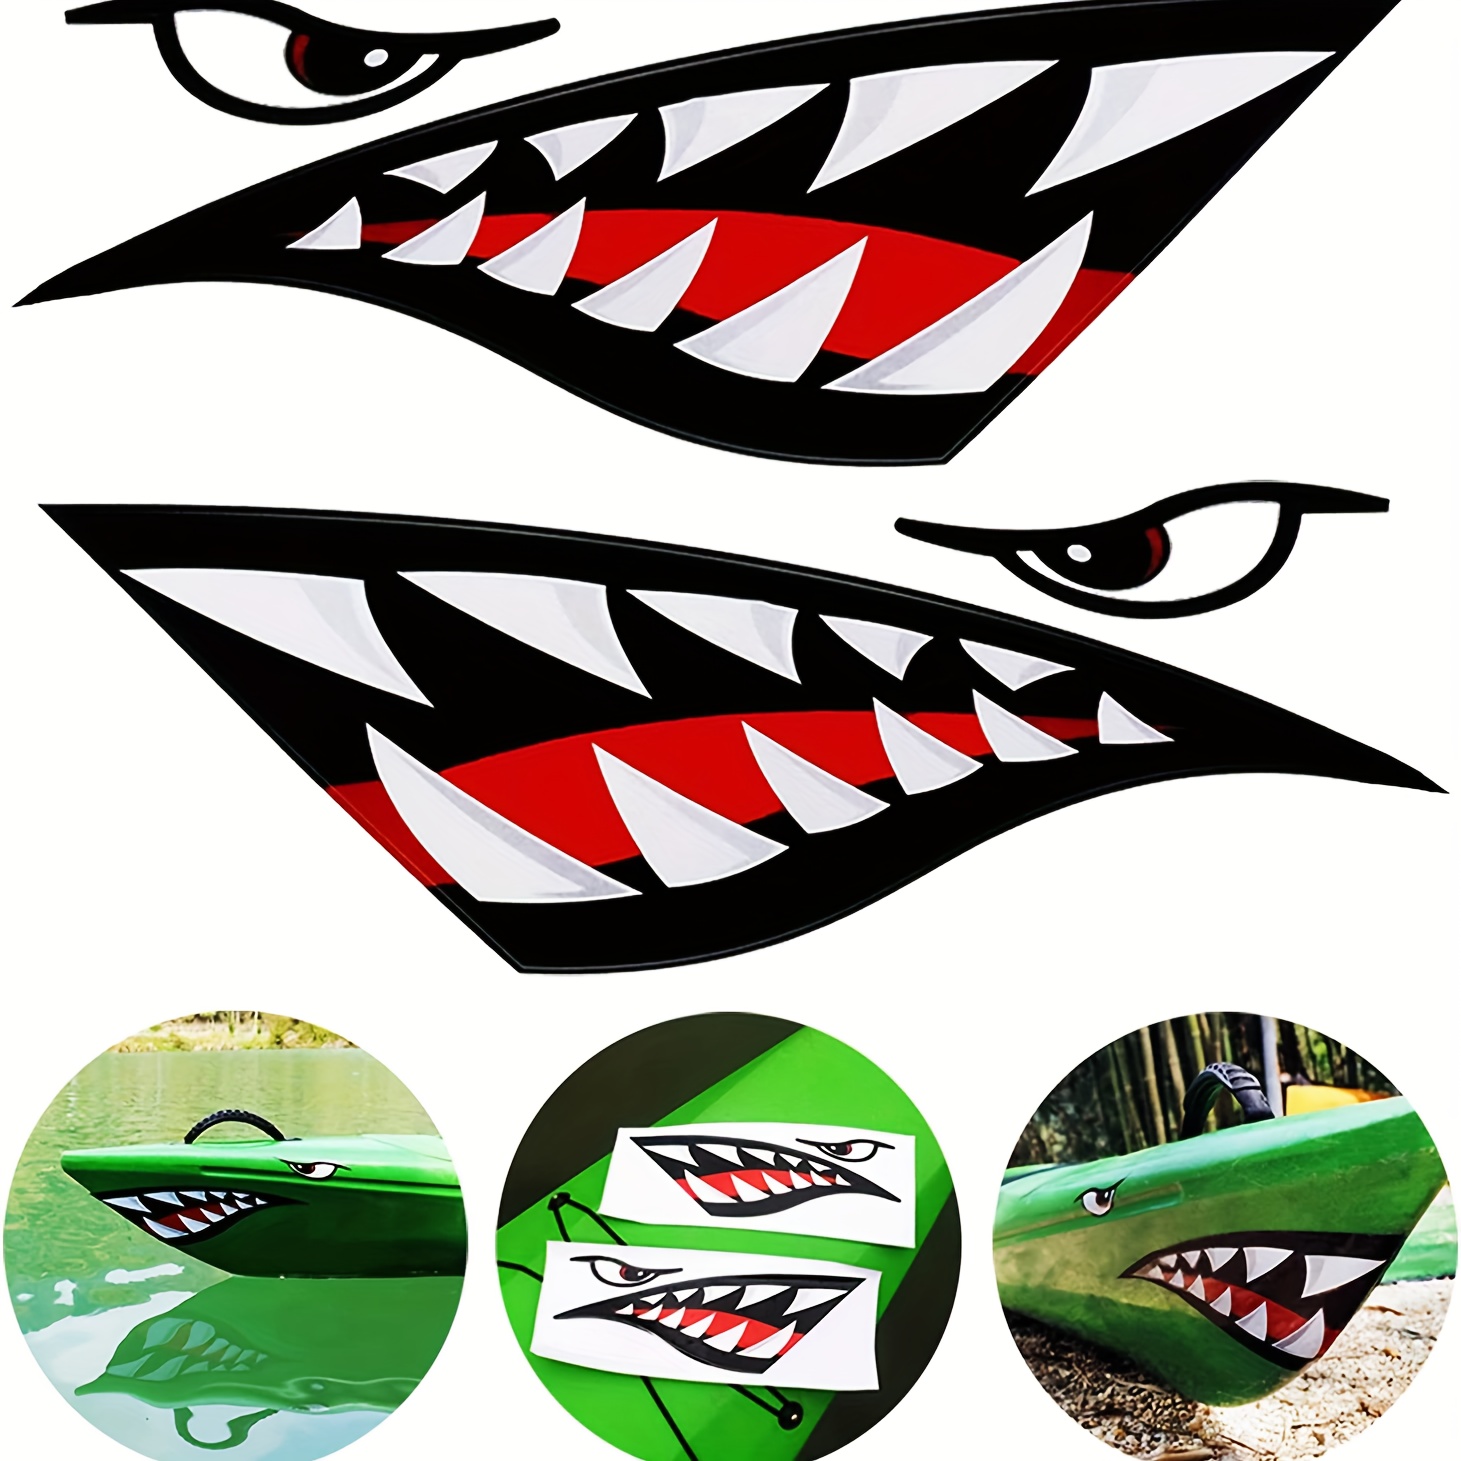 2 Pcs Fish Bone Stickers for Boat Body Decal Styling Engine Hood Decor  Cruise Sticker Mural Vinyl Covers Autosticker Car Decals